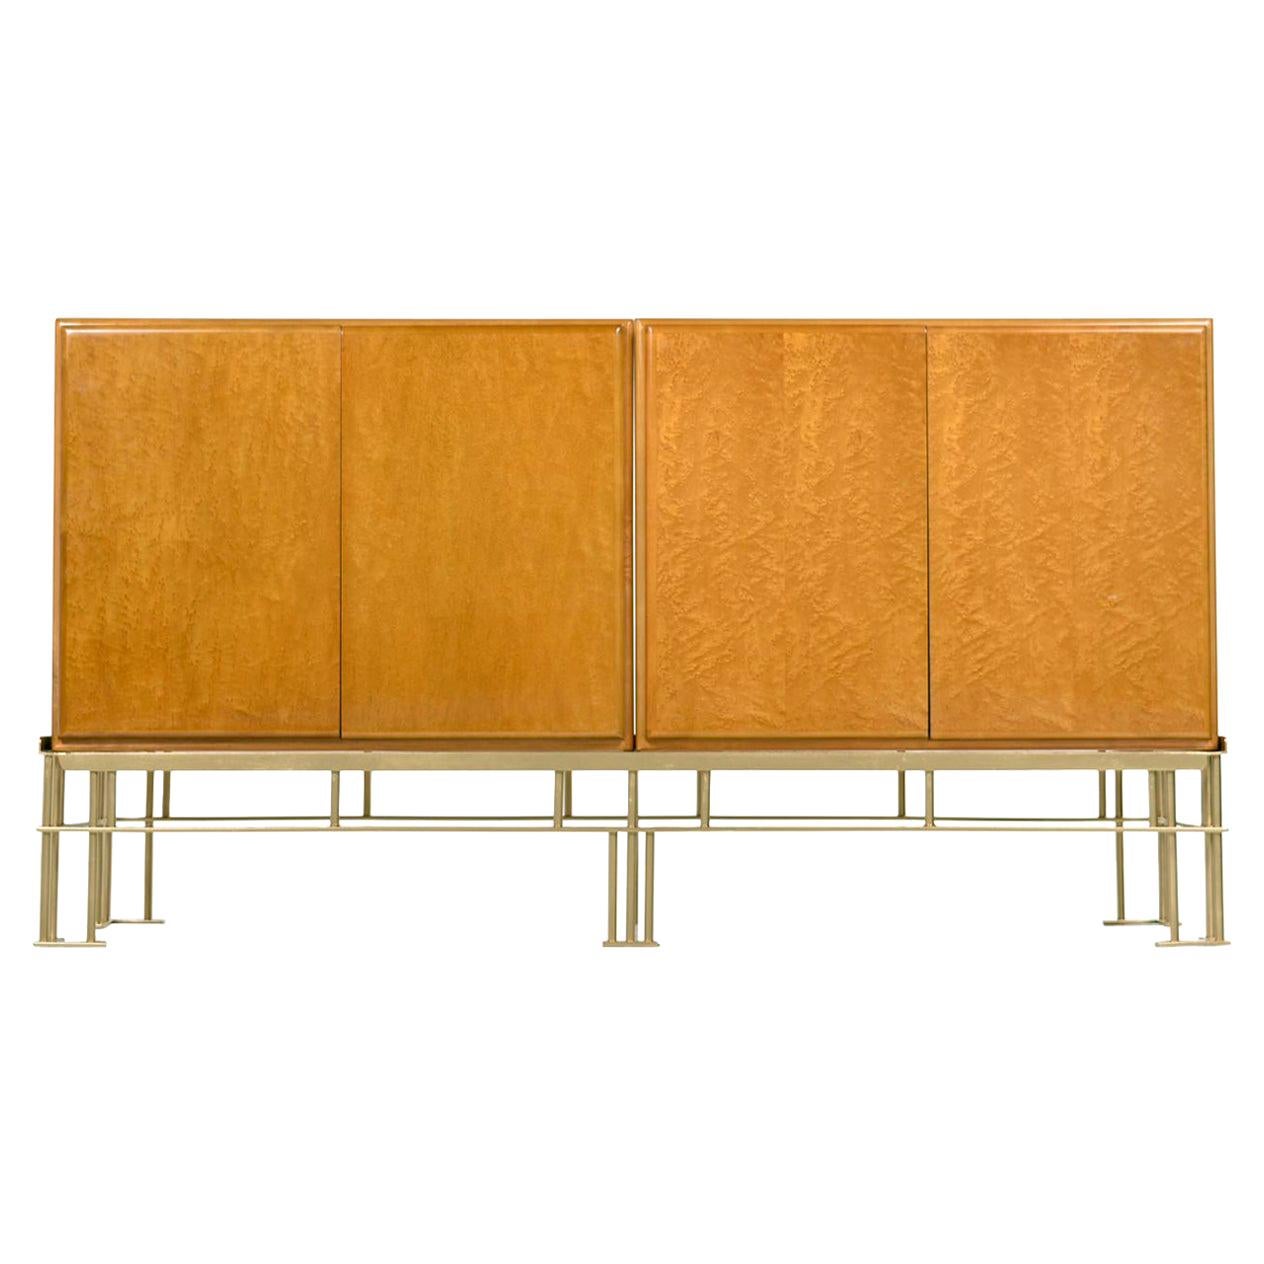 These iridescent lacquered solid bird's-eye maple wood cabinets are sure to make this piece the focal point of any room. Cabinets are removable from metal frame. One adjustable solid maple shelf in each cabinet. Cabinets (not base) Designed by Milo